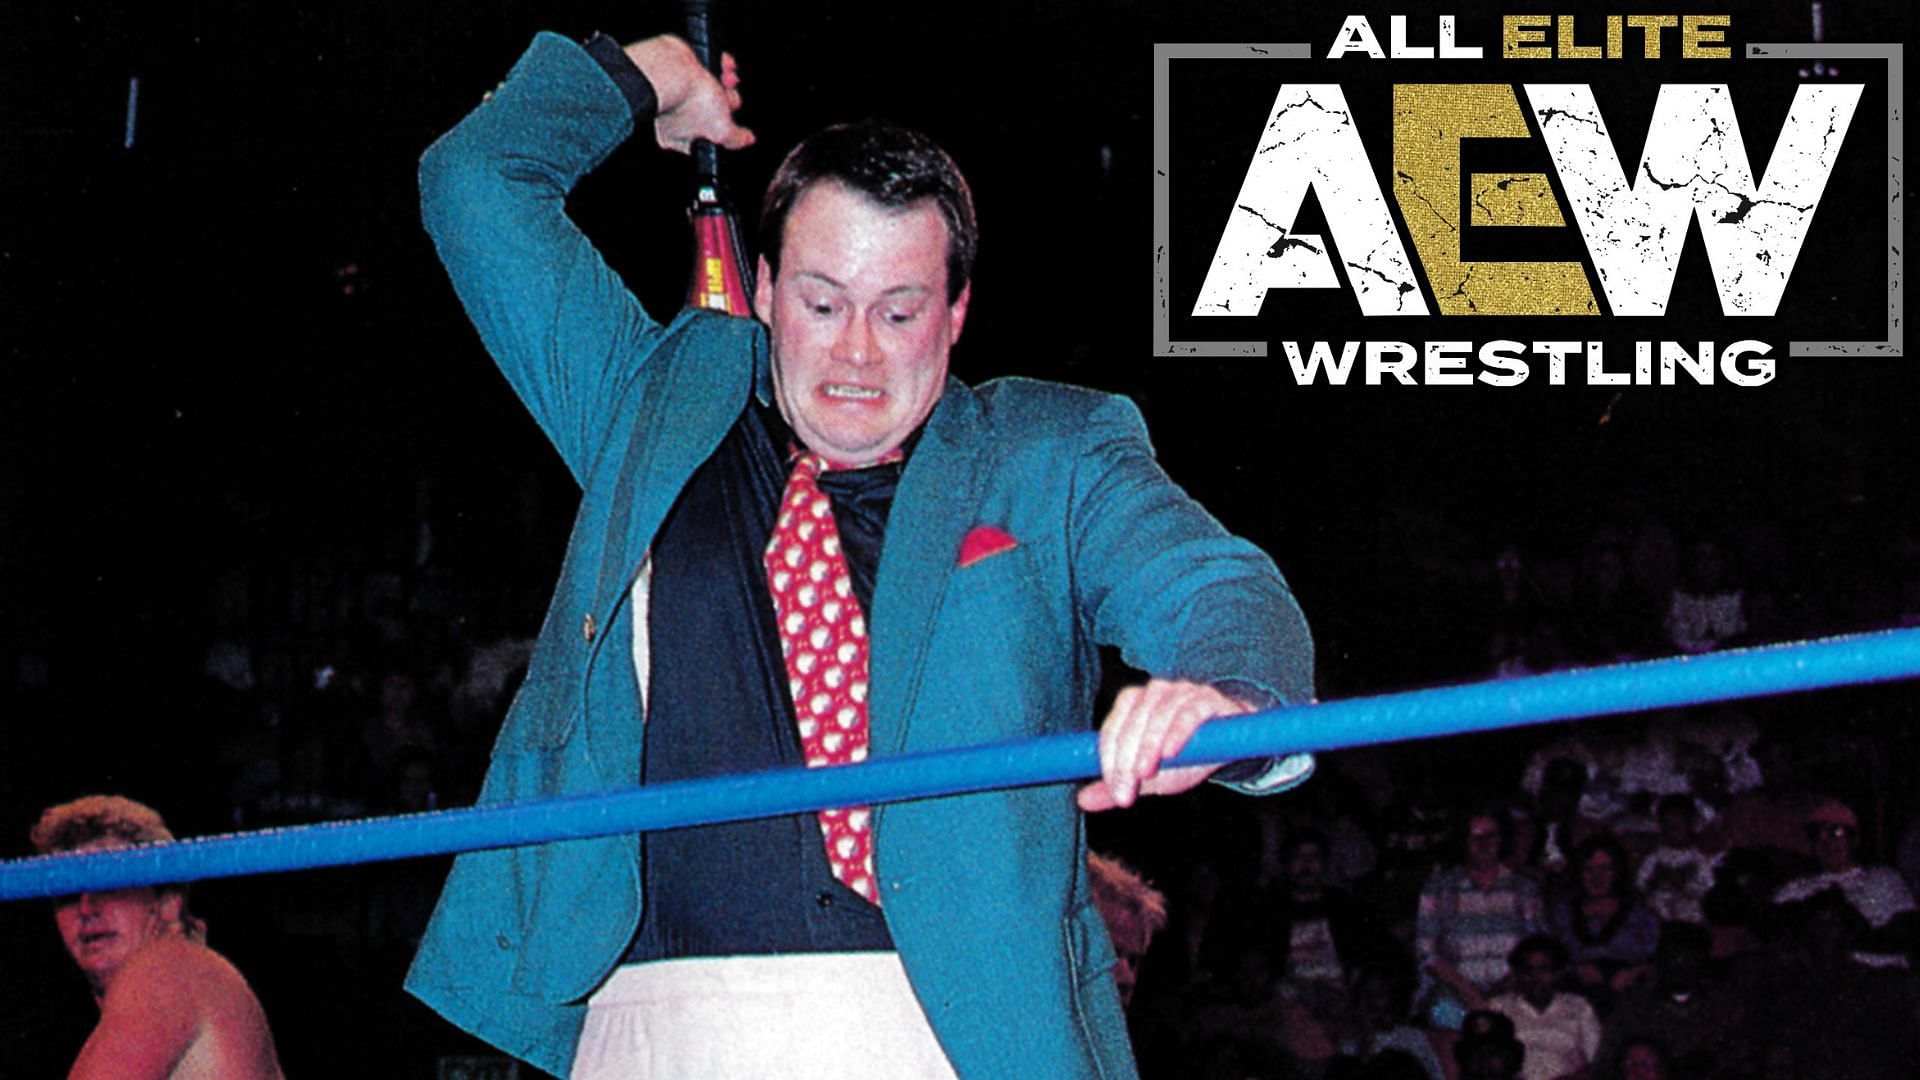 Jim Cornette during his early years as a wrestling manager.